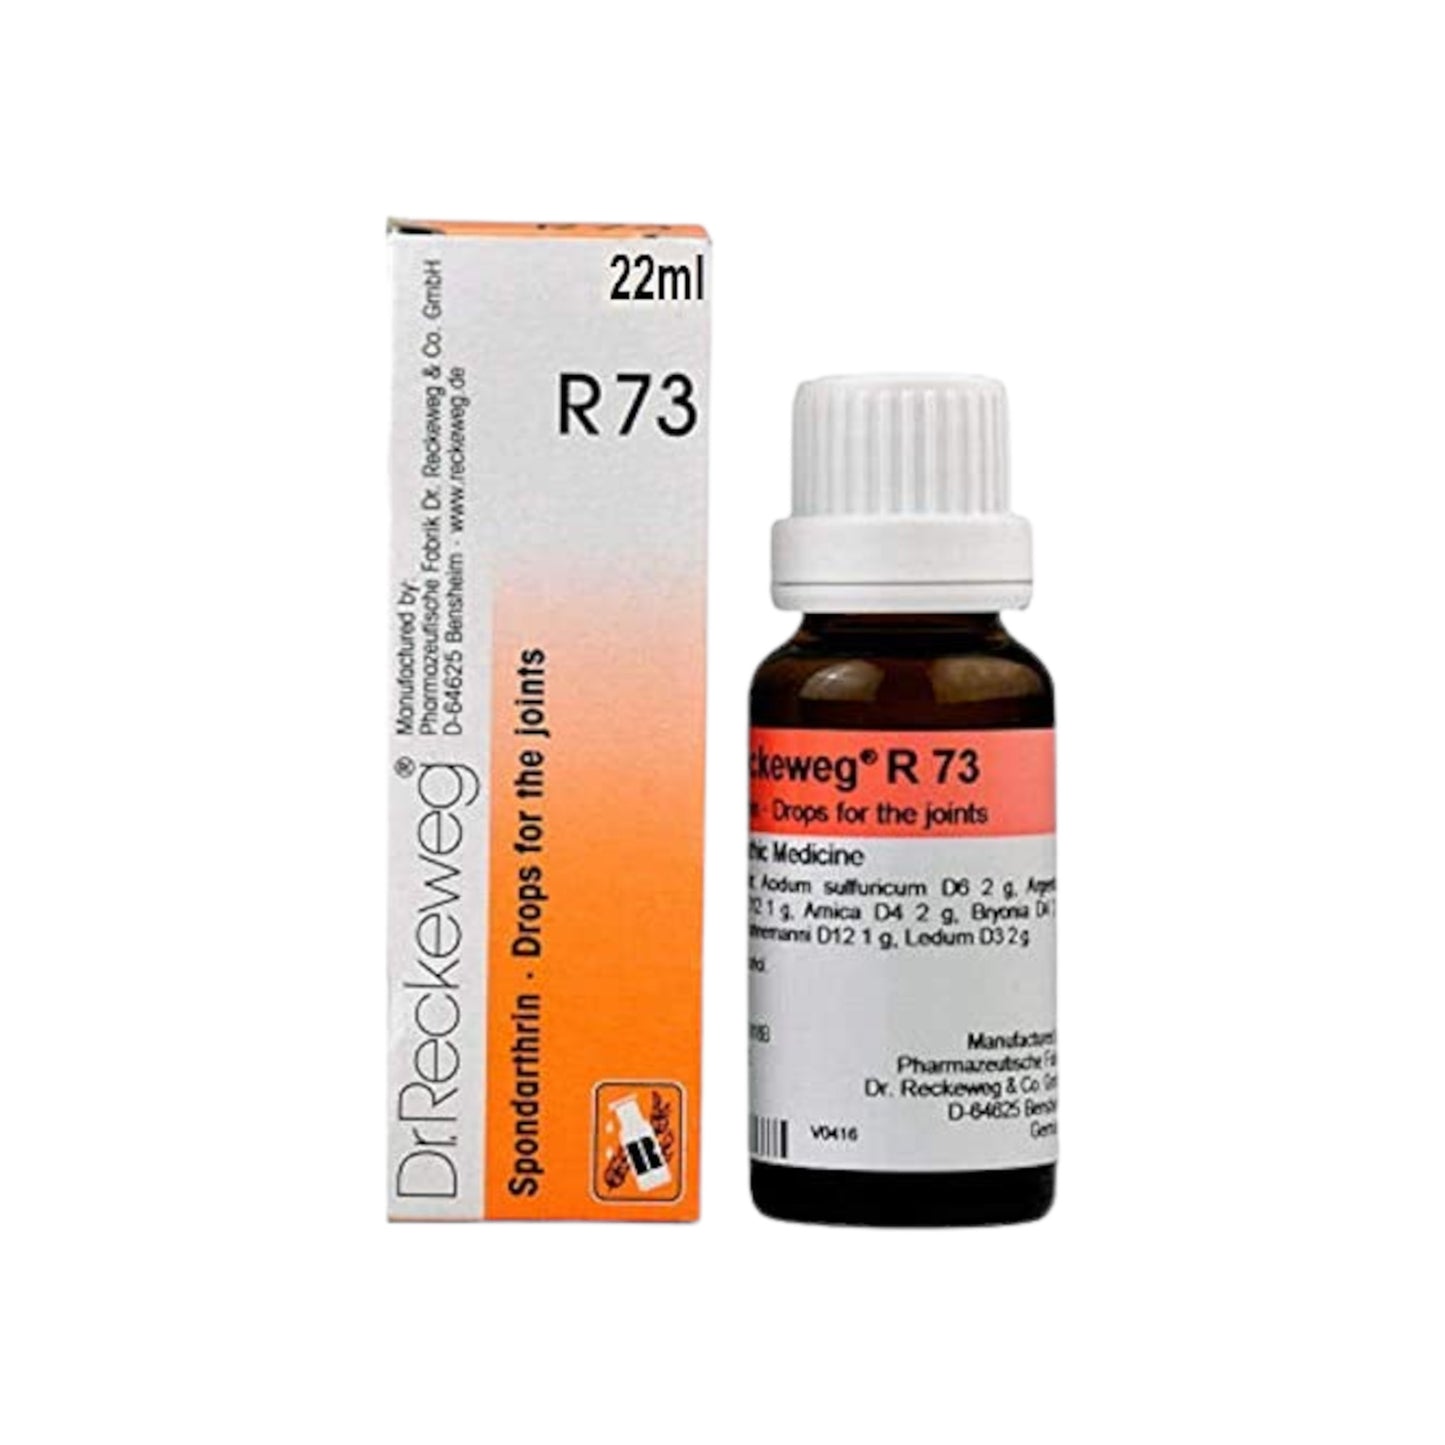 Image: DR. RECKEWEG R73 - Spondarthrin Joint Drops 22 ml - Supports osteoarthritis relief for large joints and vertebrae.